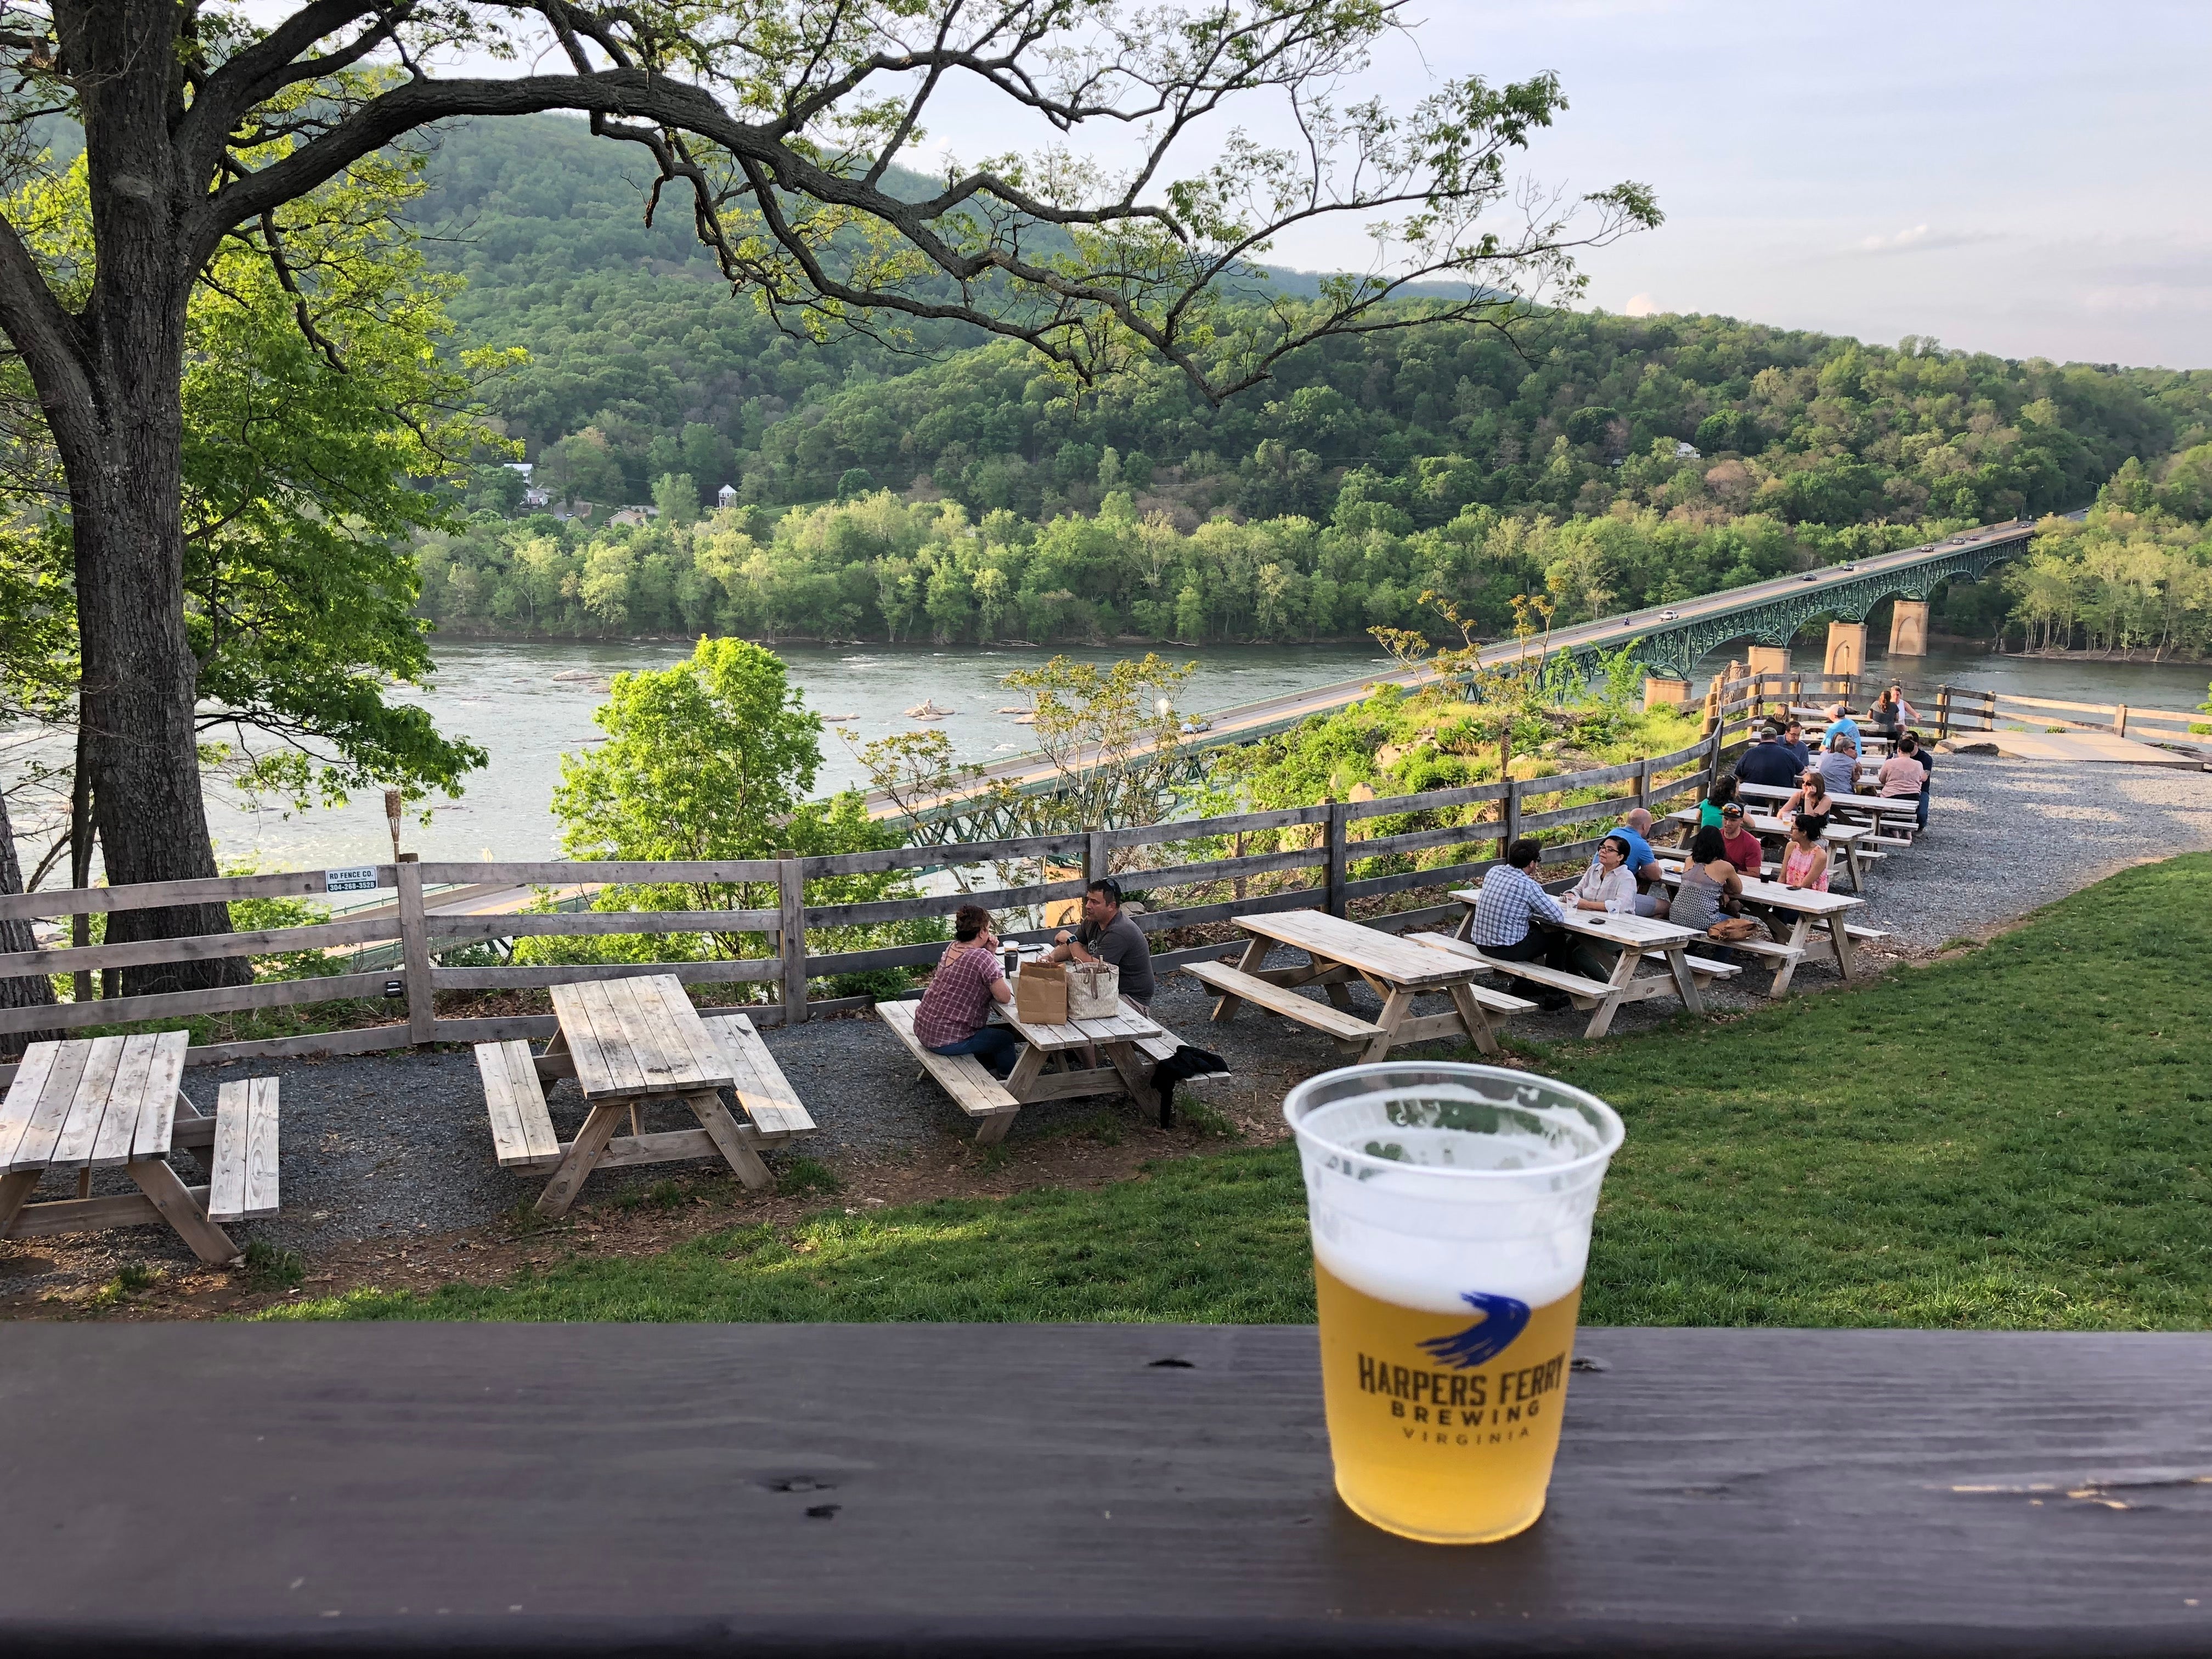 Harper's Ferry brewery is highly recommended. Good brews and beautiful views.